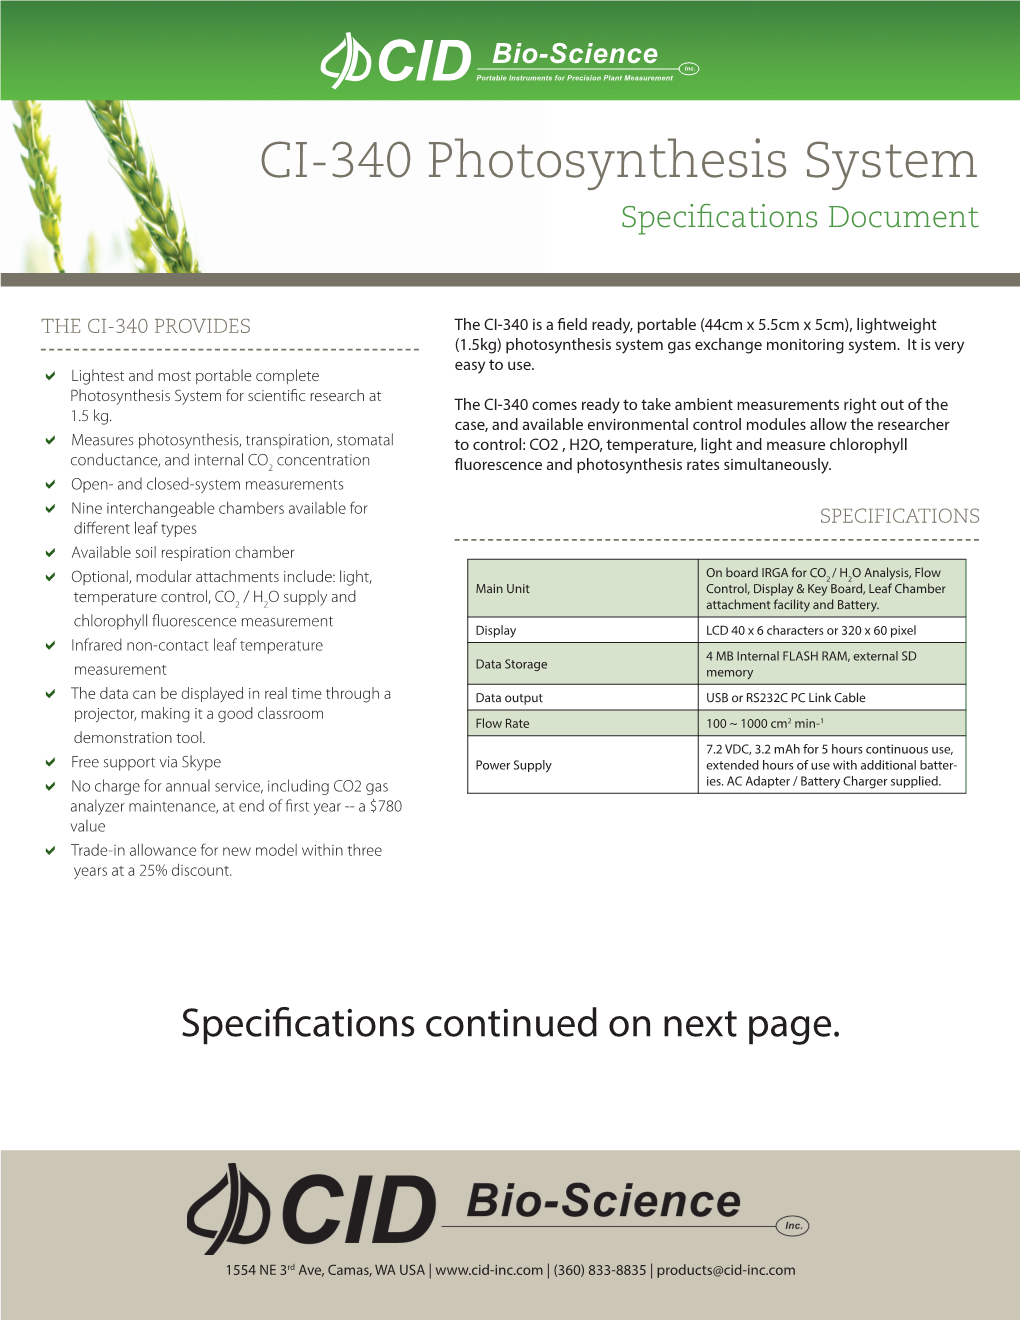 CI-340 Photosynthesis System Specifications Document